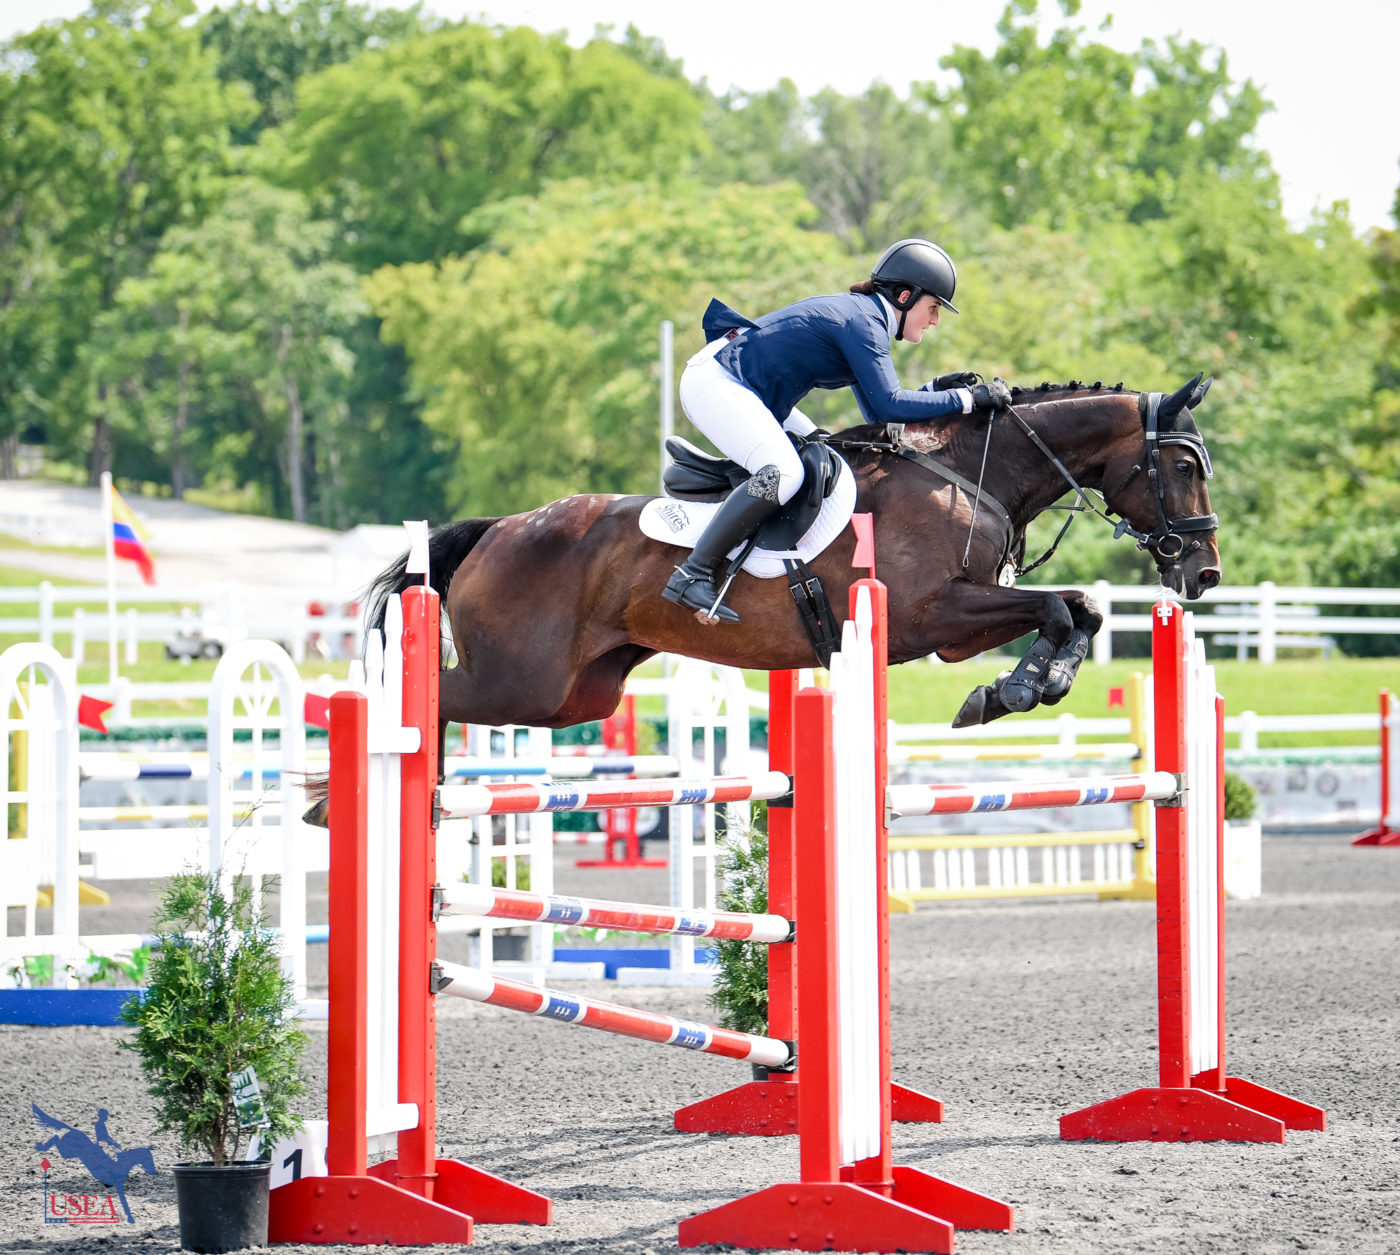 Ema Klugman and RF Redfern are in second place. USEA/Lindsay Berreth photo